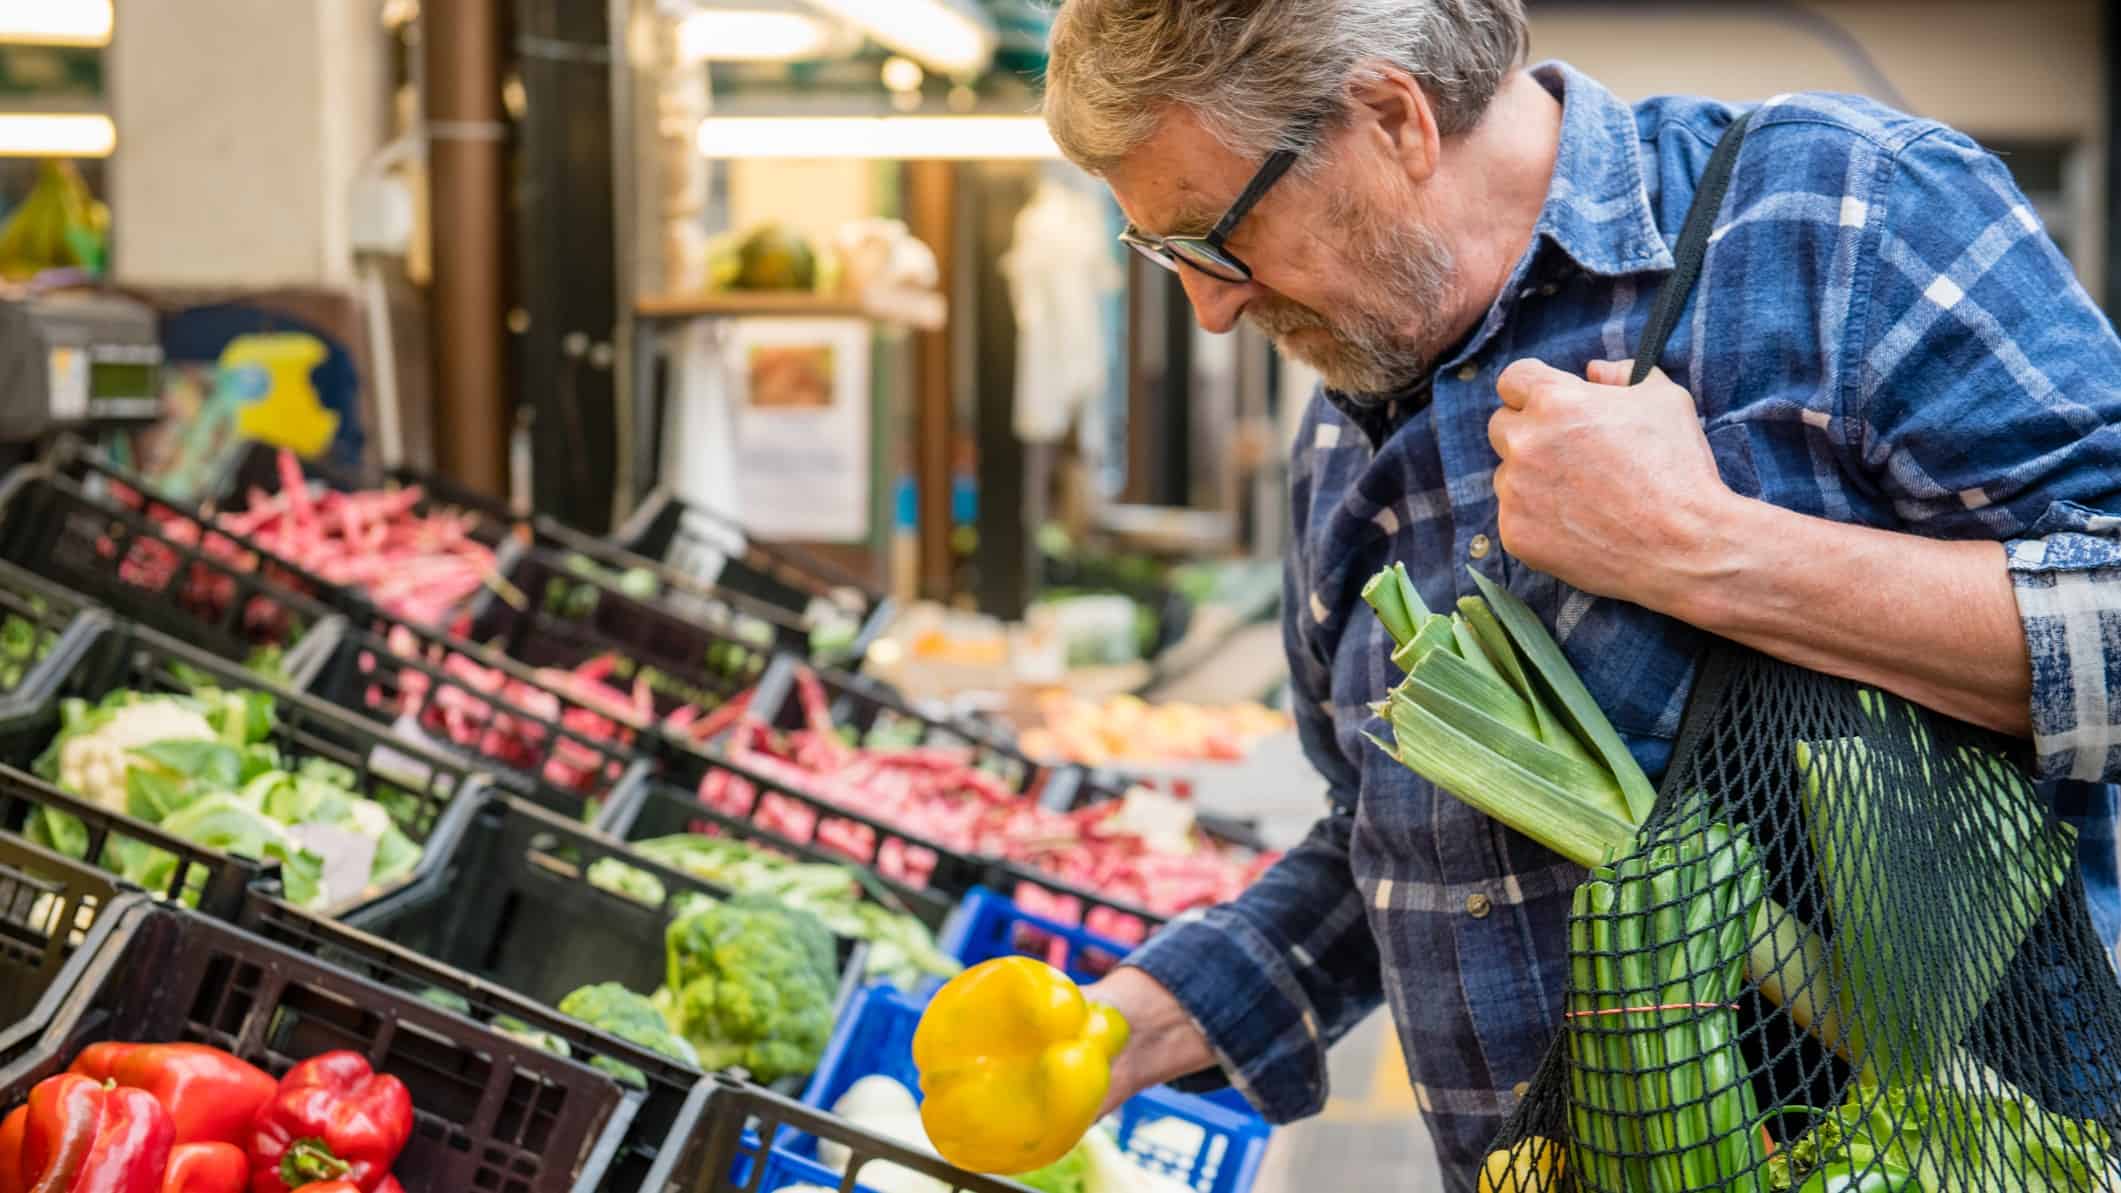 a man inspects a capsicum while holding an eco-friendly green string bag in a supermarket produce aisle.